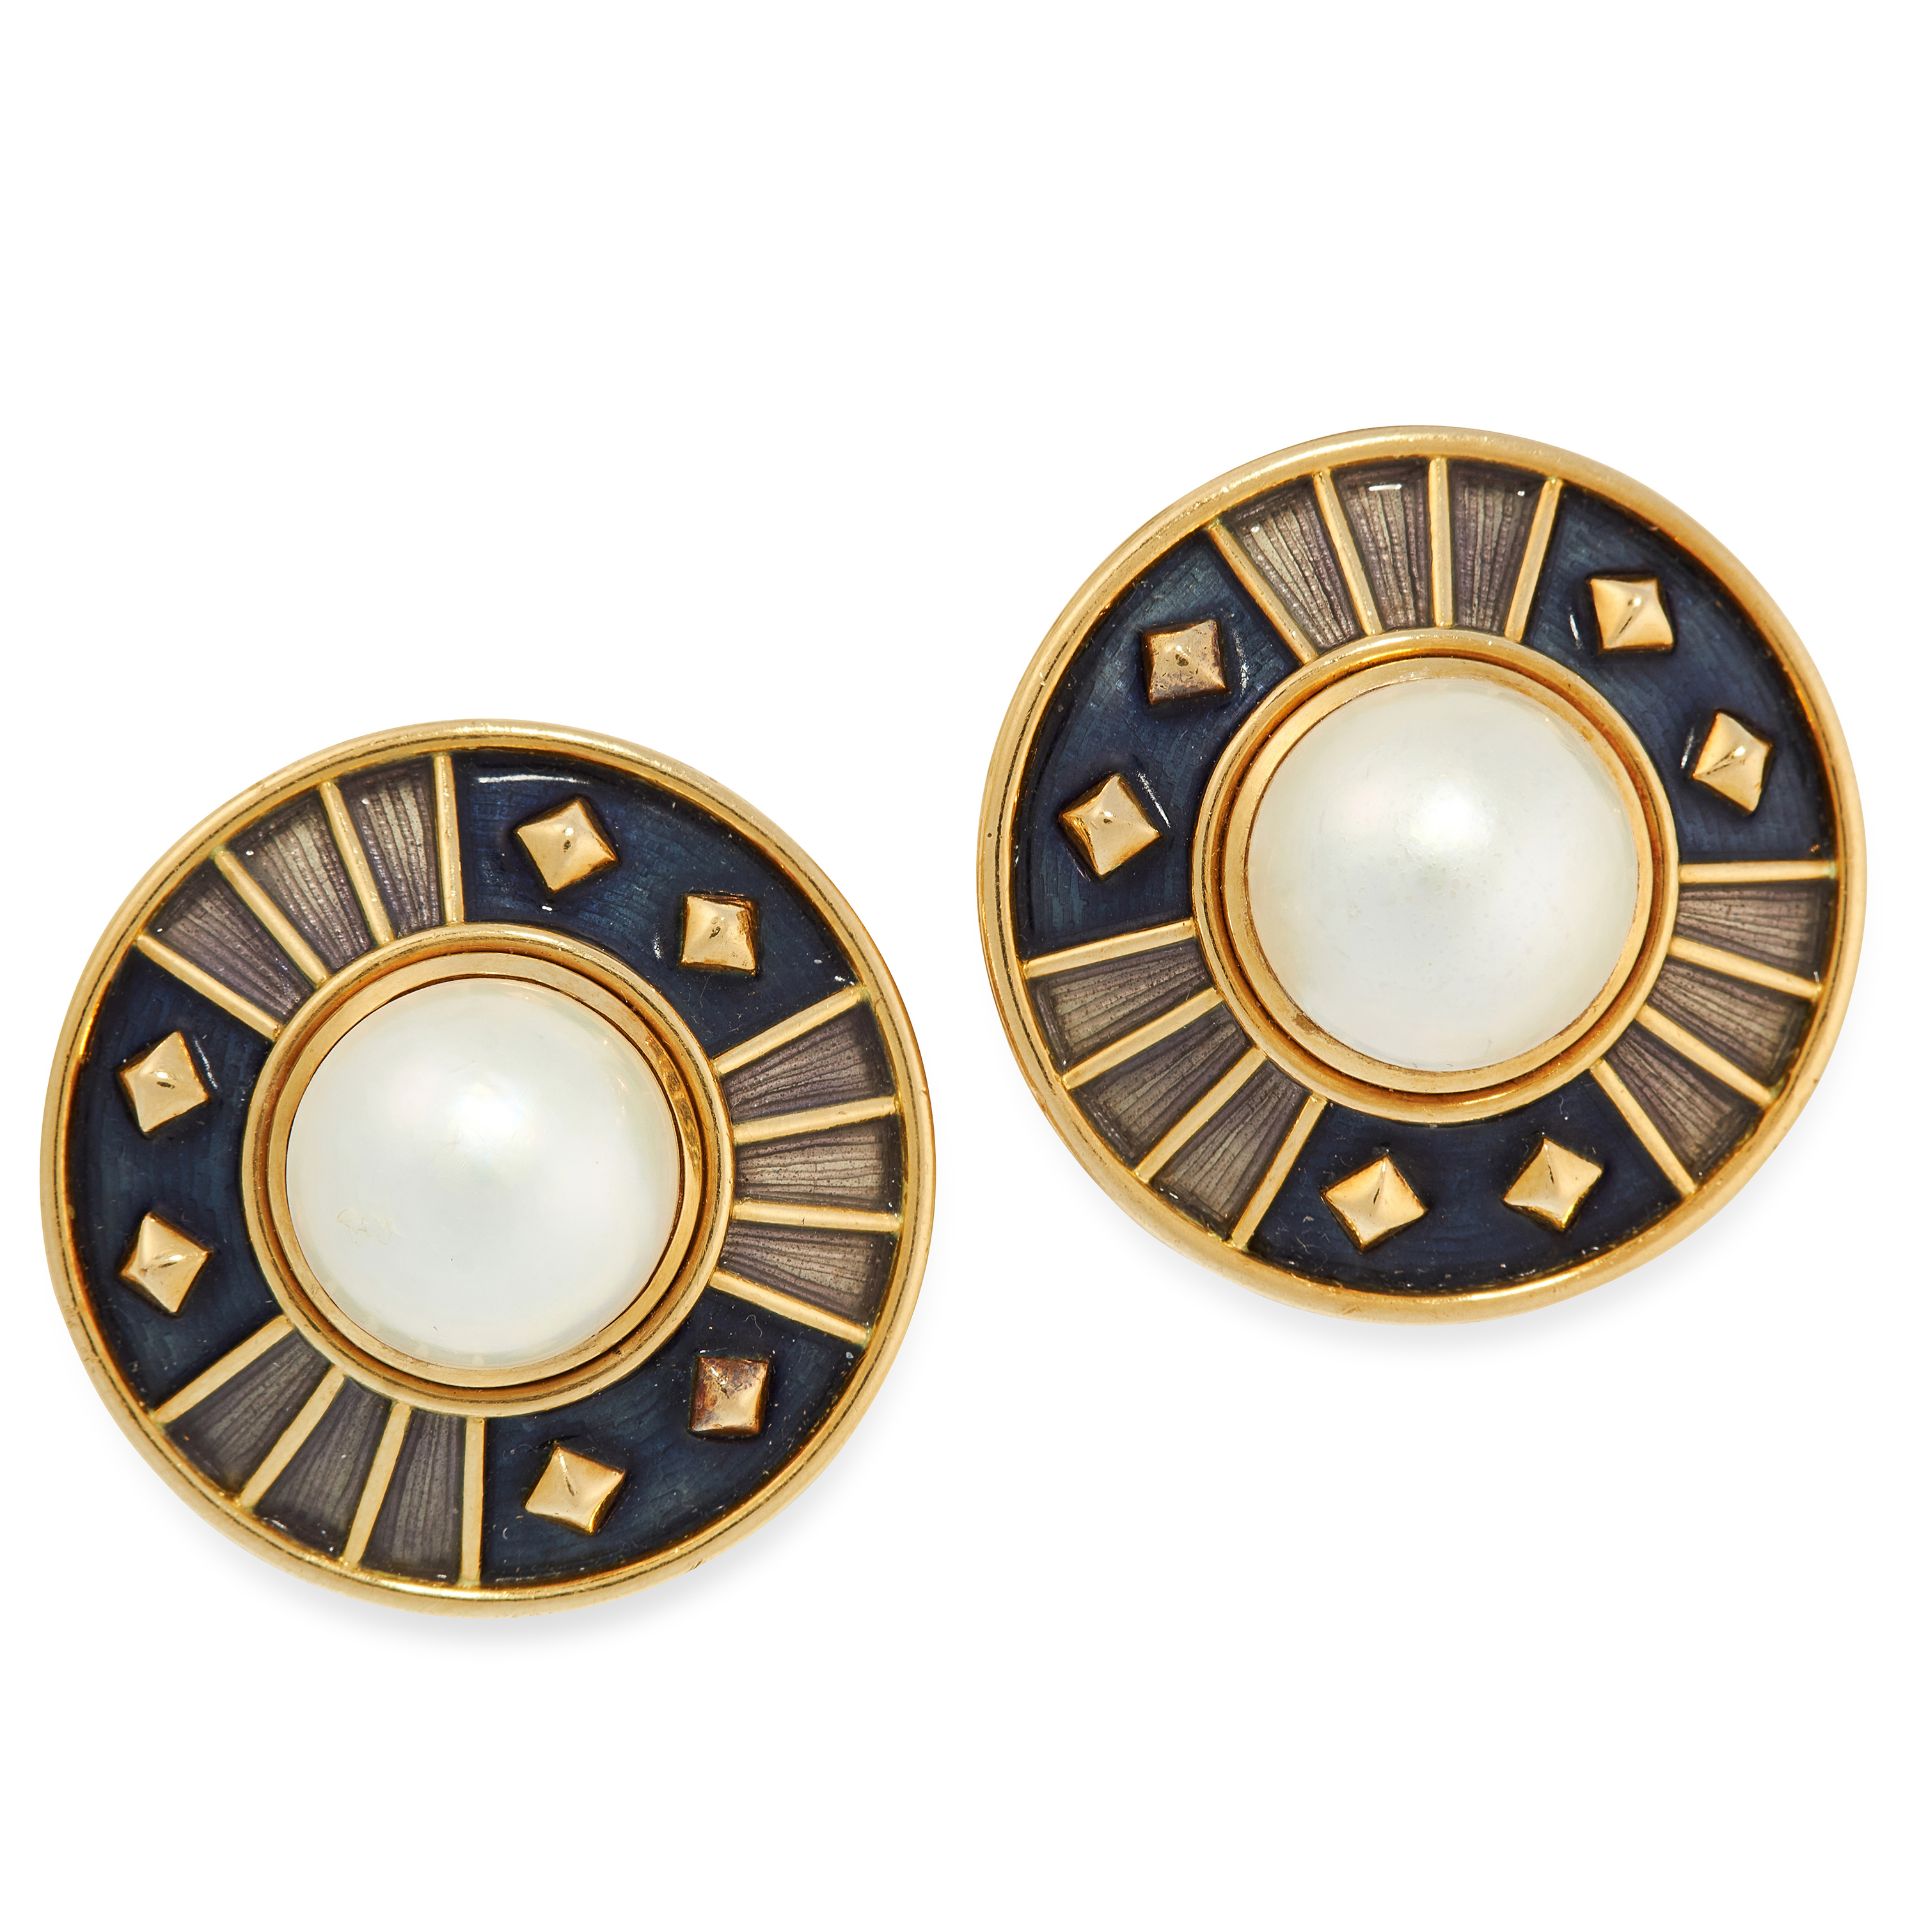 A PAIR OF PEARL AND ENAMEL CLIP EARRINGS, LEO DE VROOMEN 1990 in 18ct yellow gold, of circular